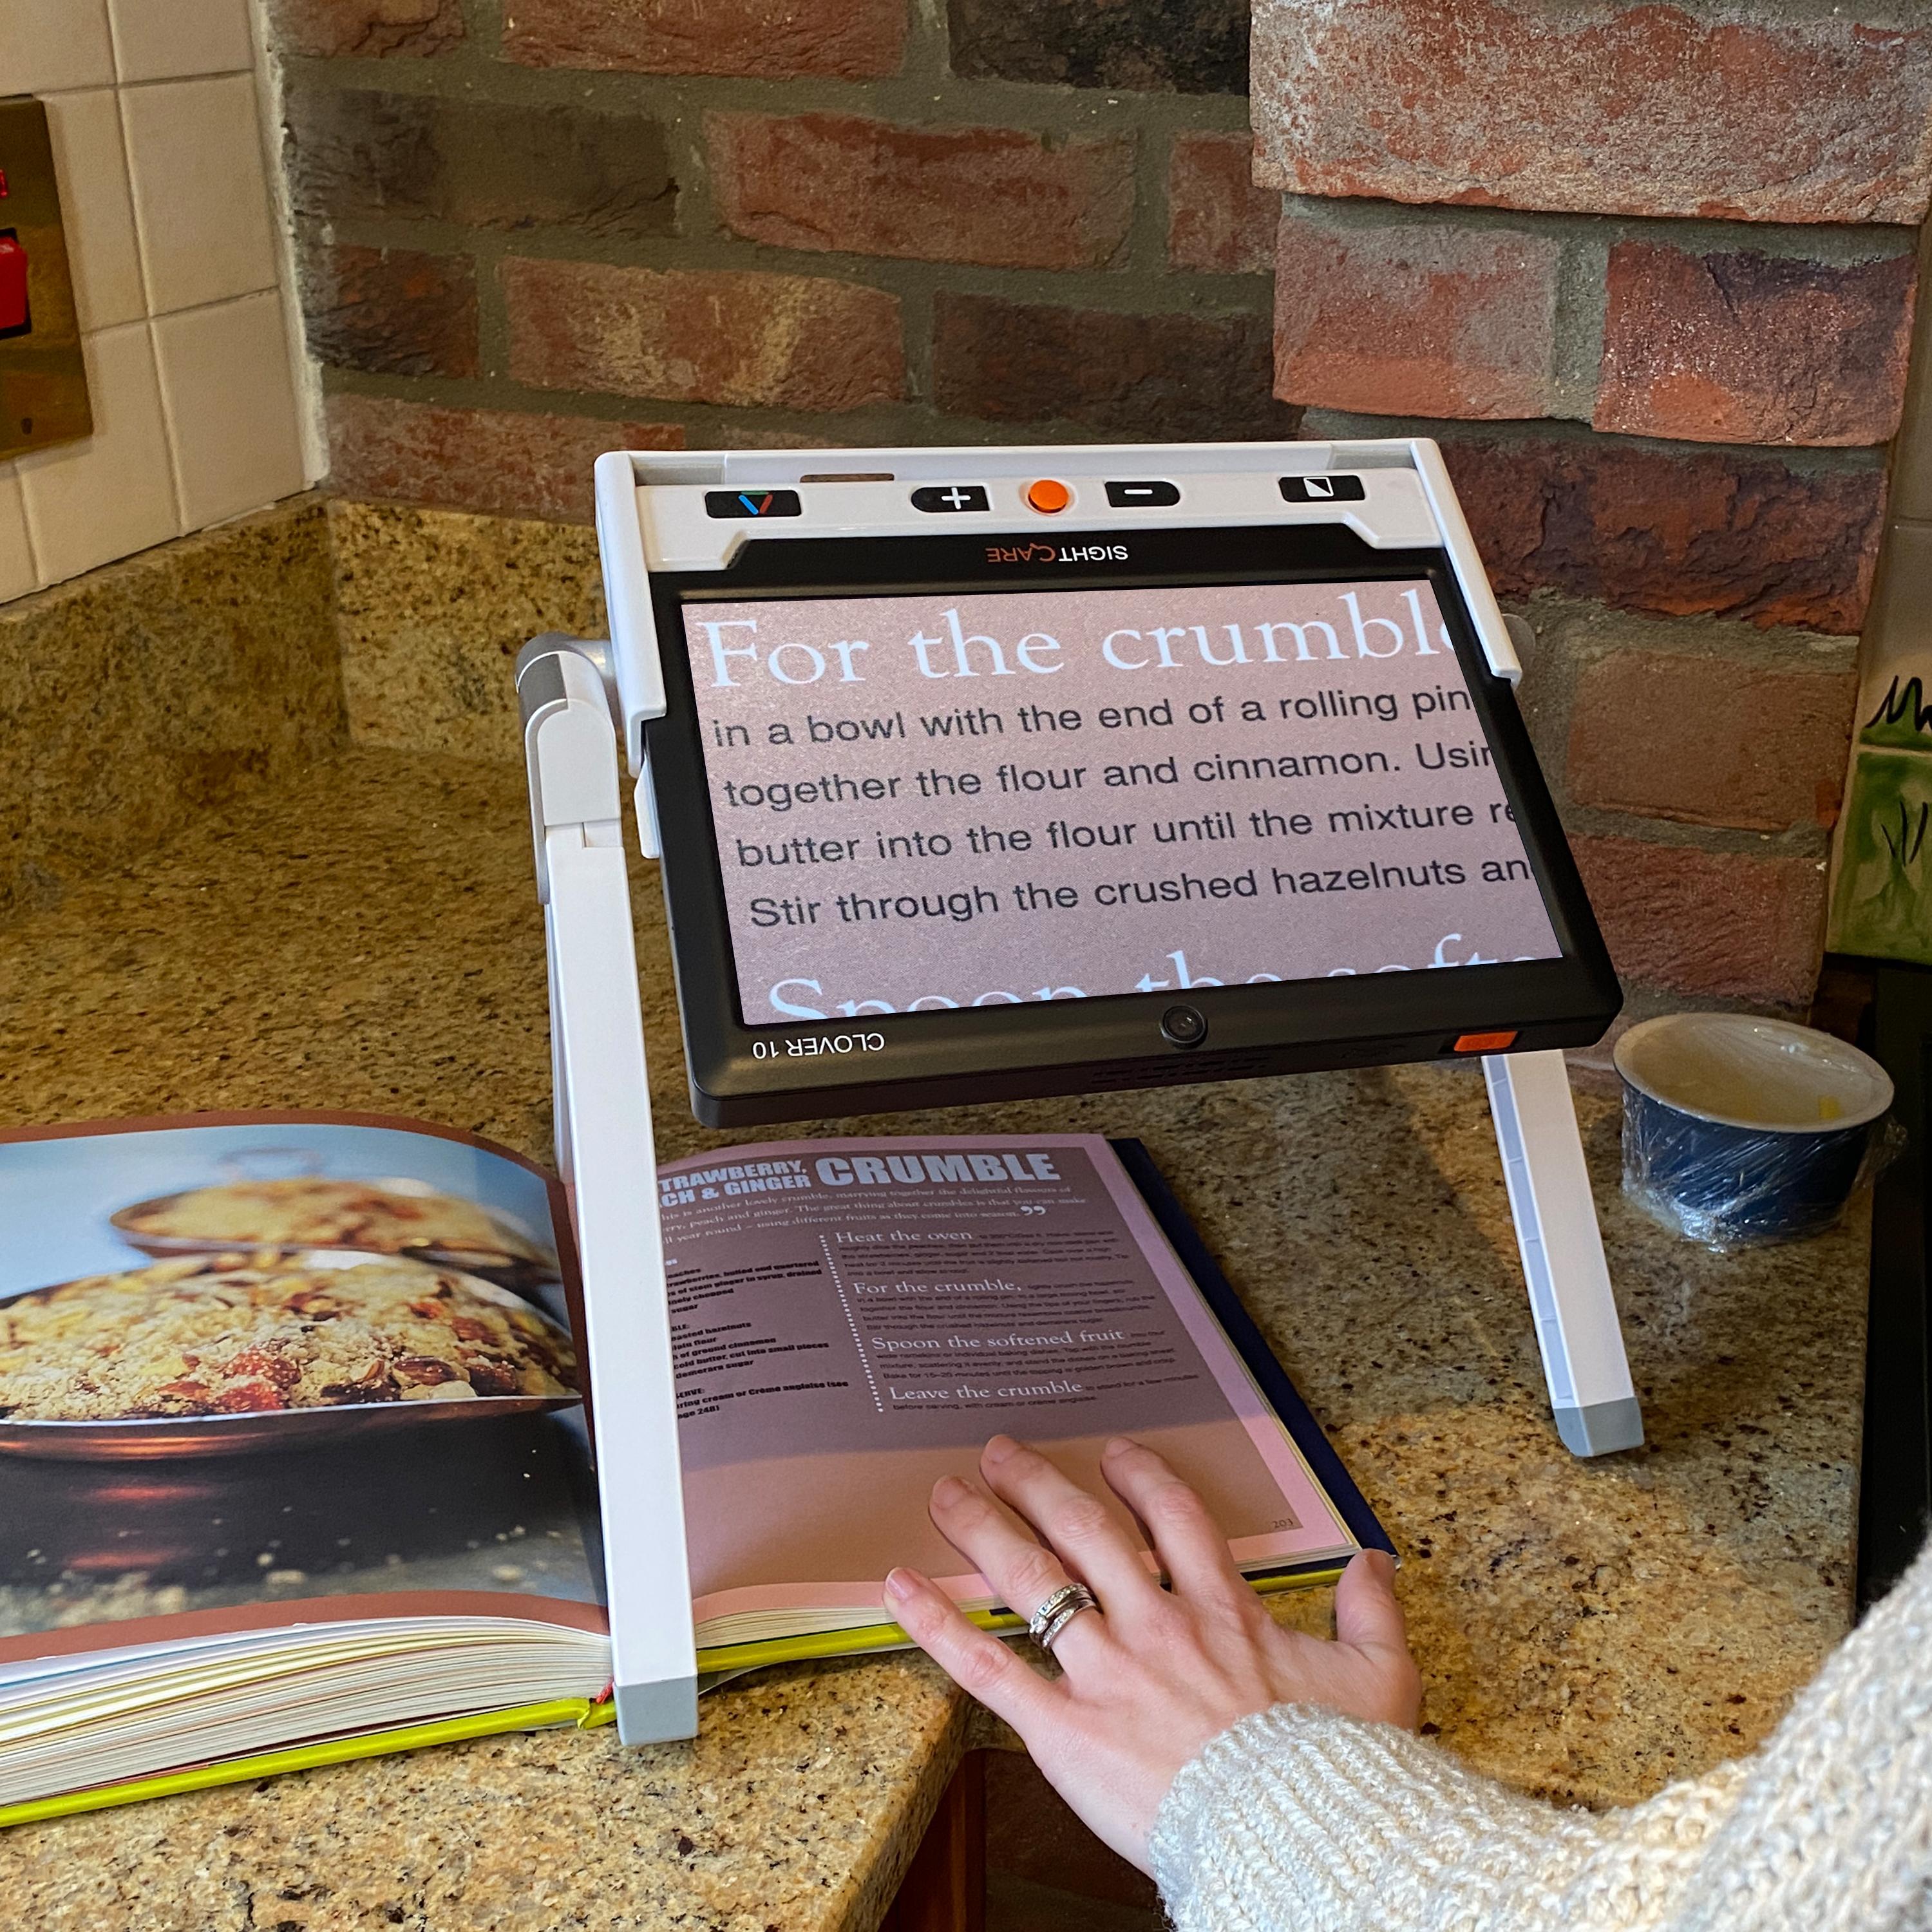 A clover 10 in its optional stand being used in the kitchen to view a recipe from a magazine